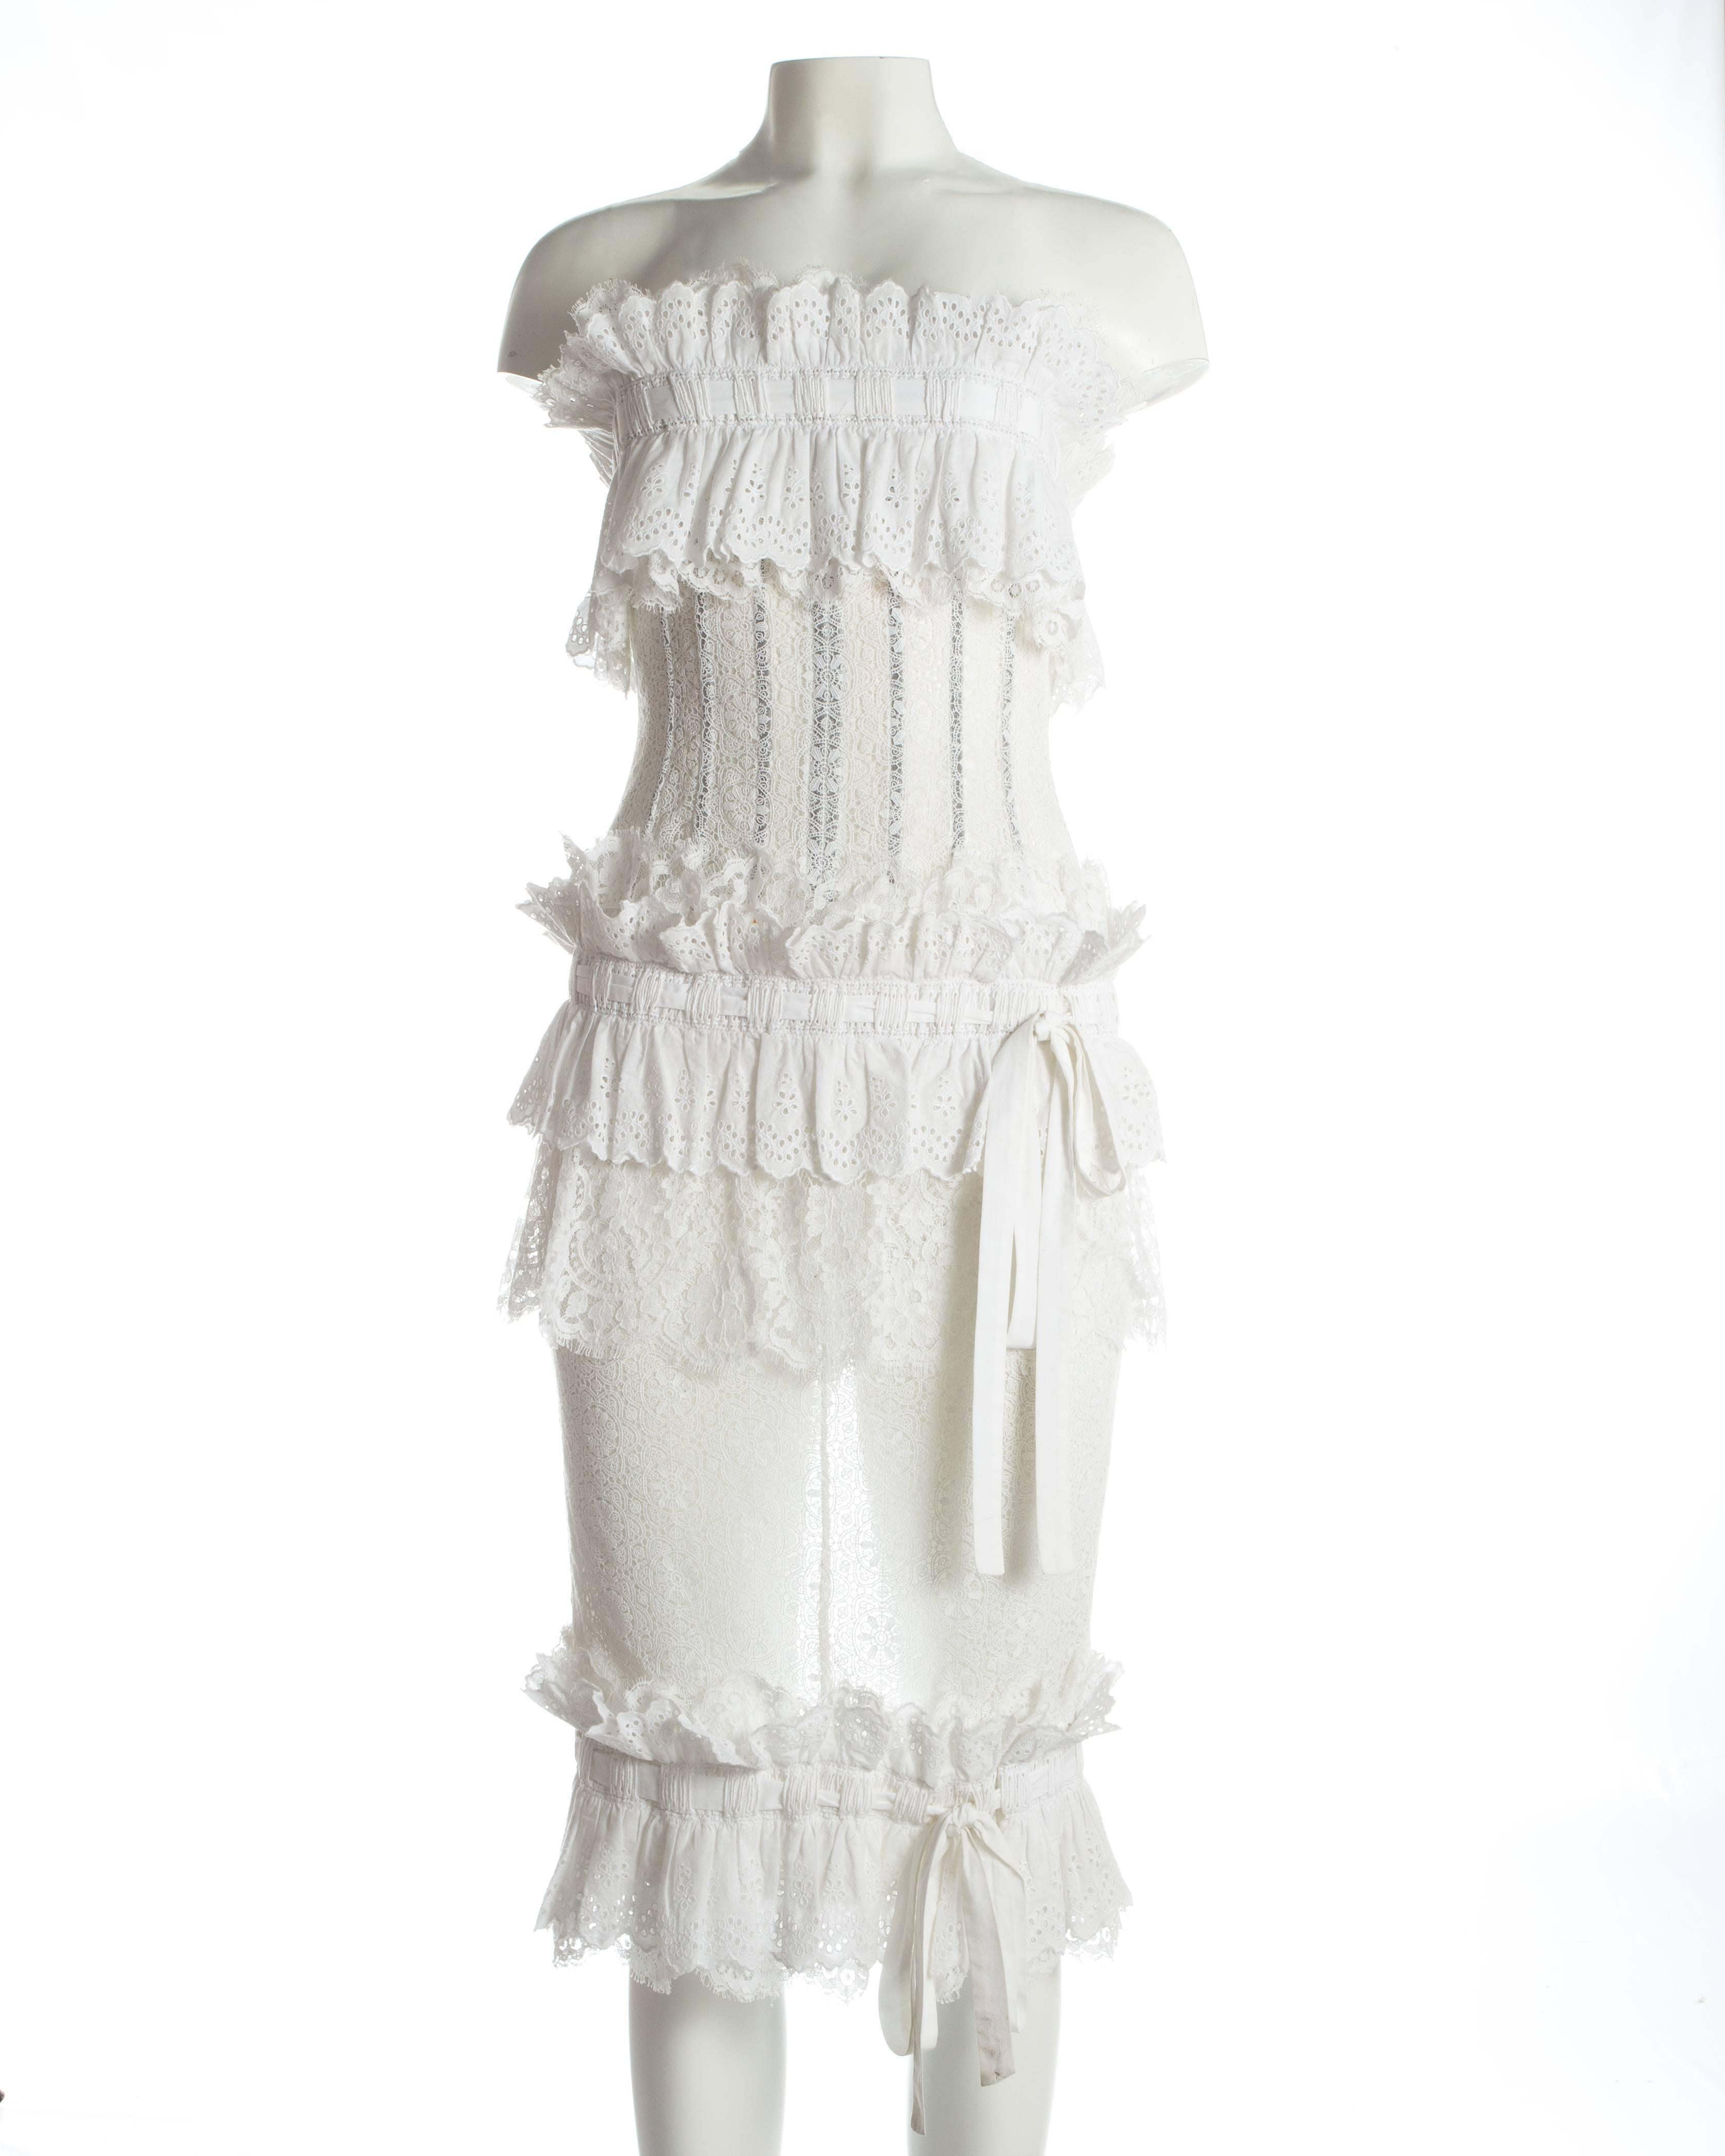 - Broderie Anglaise and lace 
- Internal boning on bust acting as a corset
- Exposed metal zipper at centre back 
- Leg slit on centre back seam 
- 3 drawstring fastenings witch can fastening with bows or knots 

Spring-Summer 2006